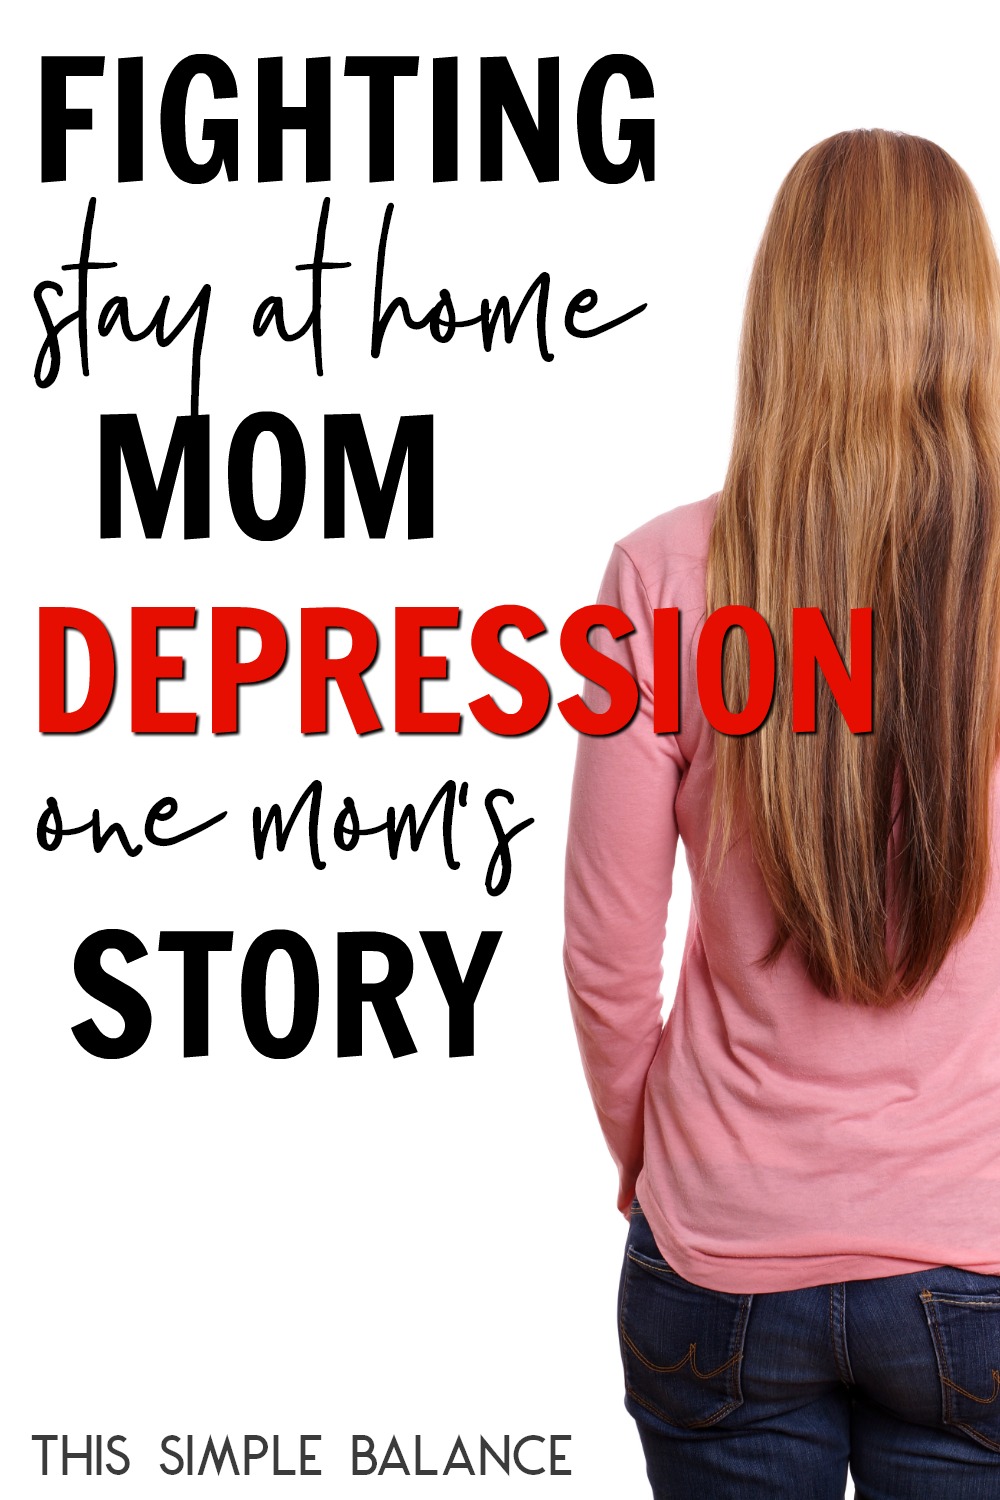 depressed mom with long red hair, picture from the back, with text overlay "fighting stay at home mom depression - one mom's story"